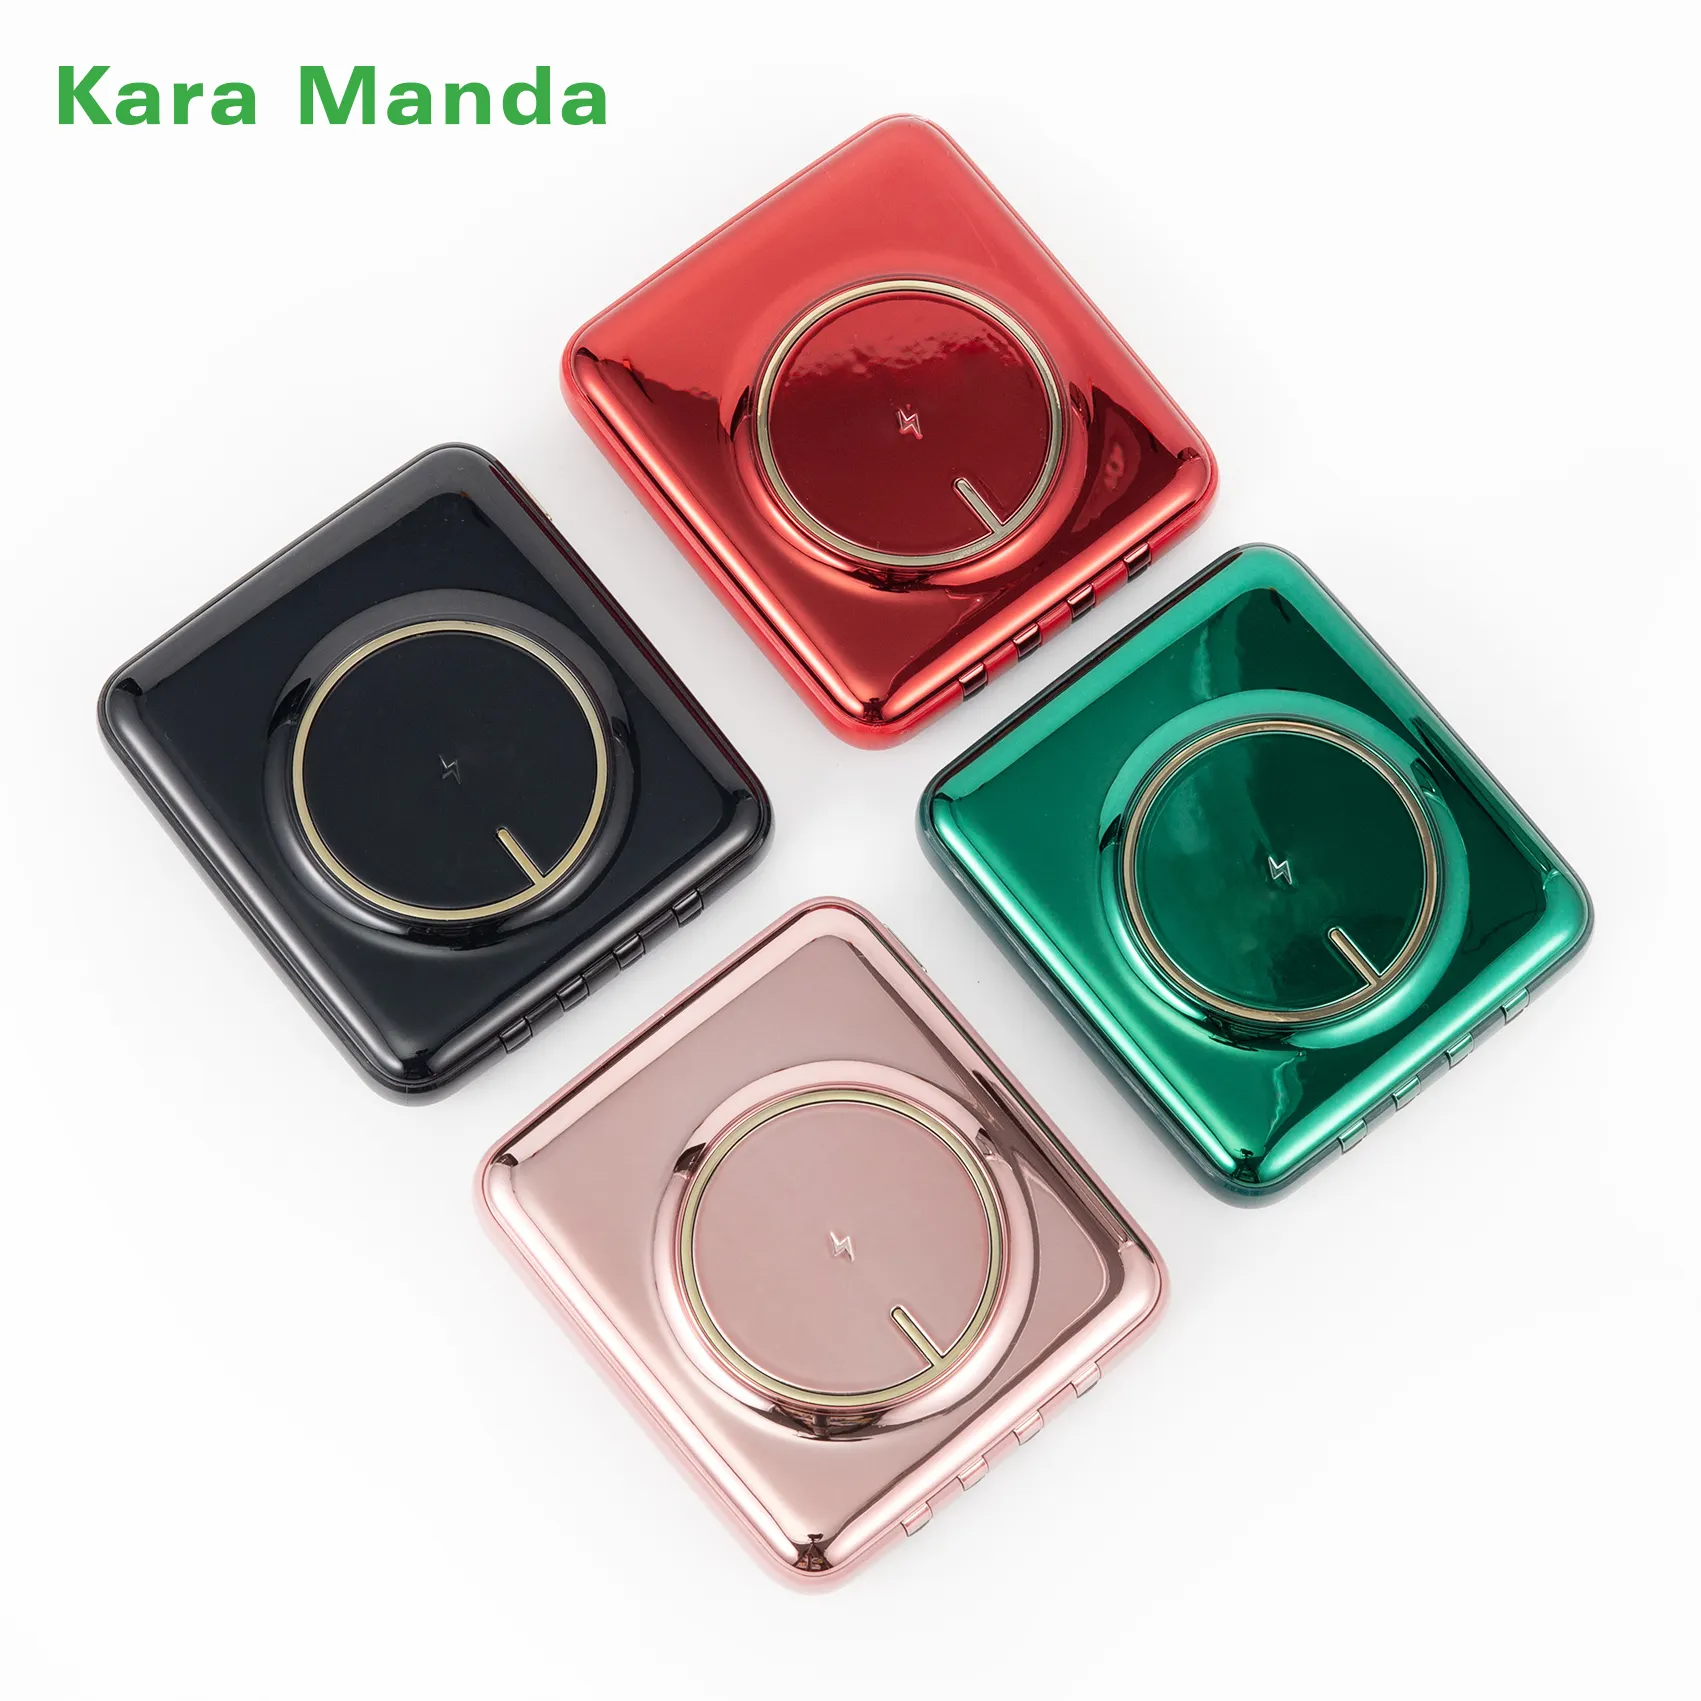 Kara Manda New Updated 10000mAh Mini Slim Portable Power Bank for iPhone Mobile Charger with Wireless Charging Cable